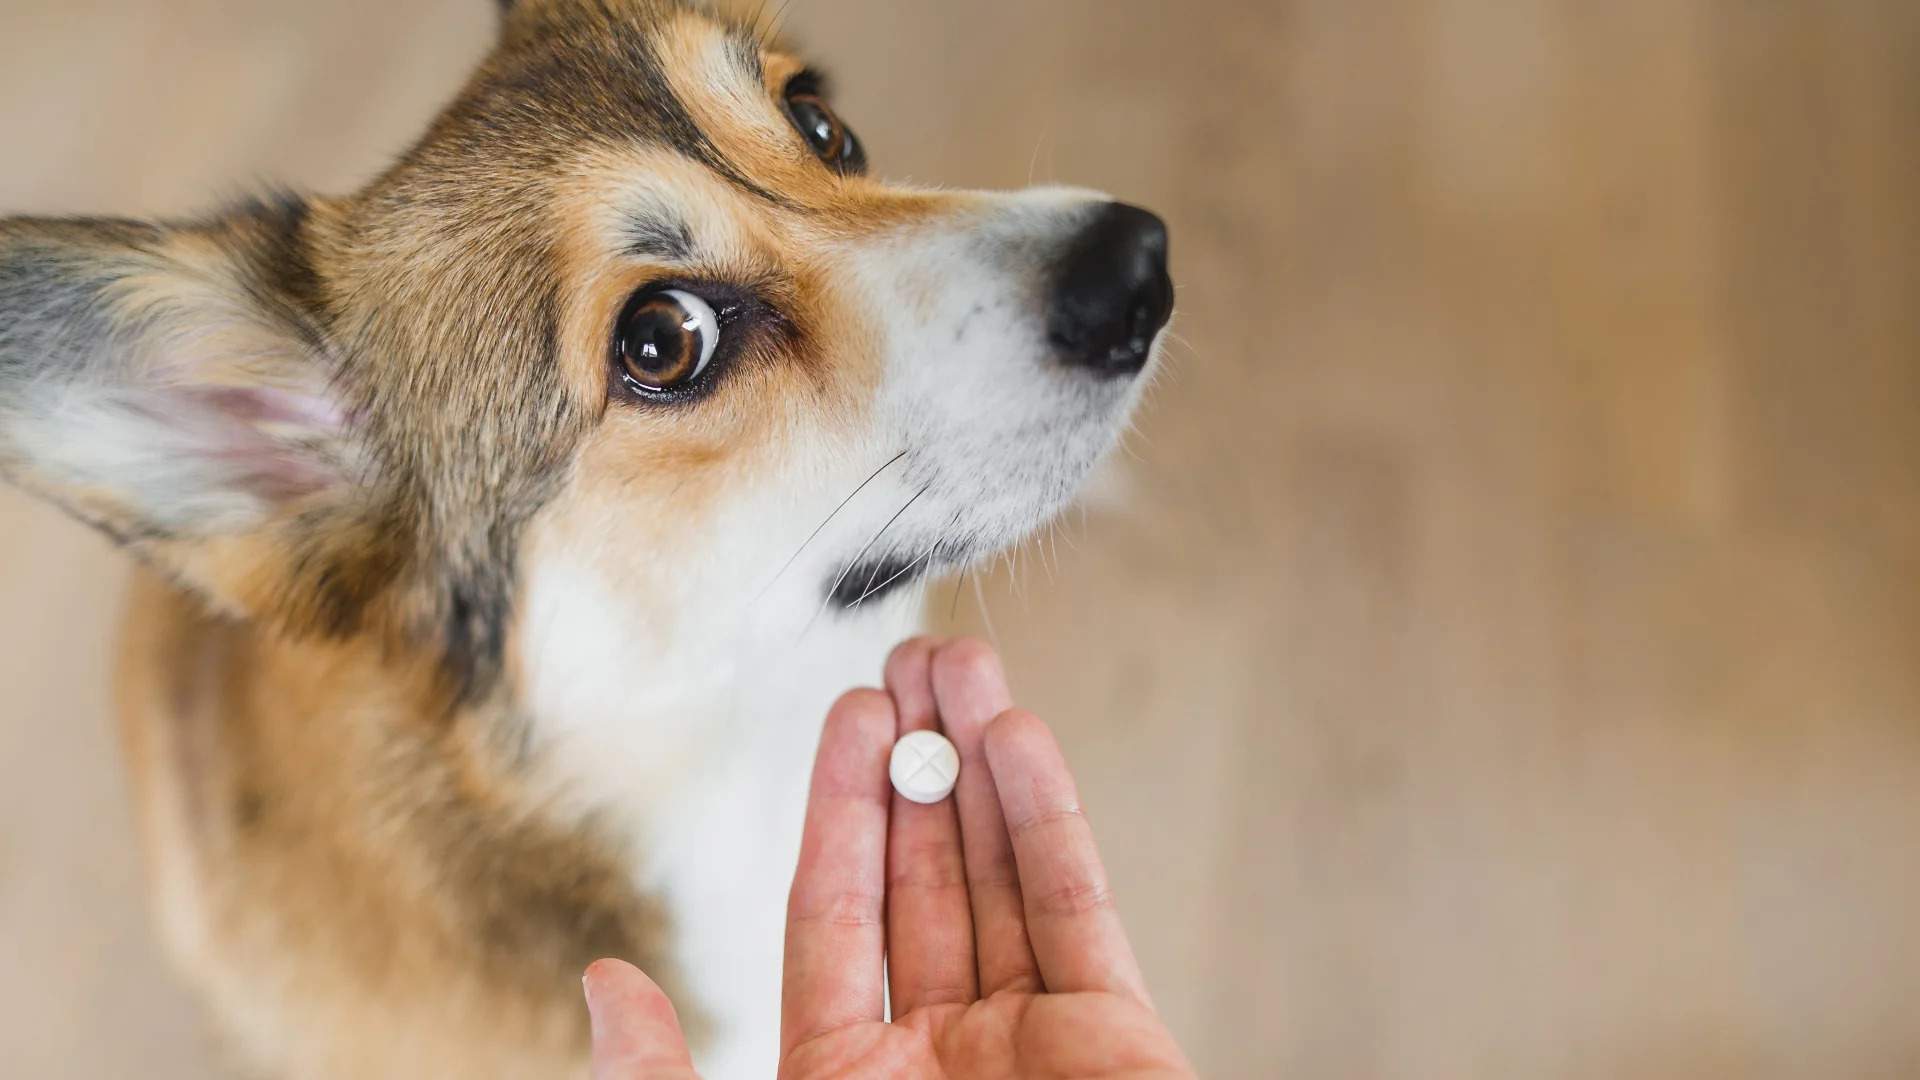 How Many Arthritis Tablets Can I Give My Dog?